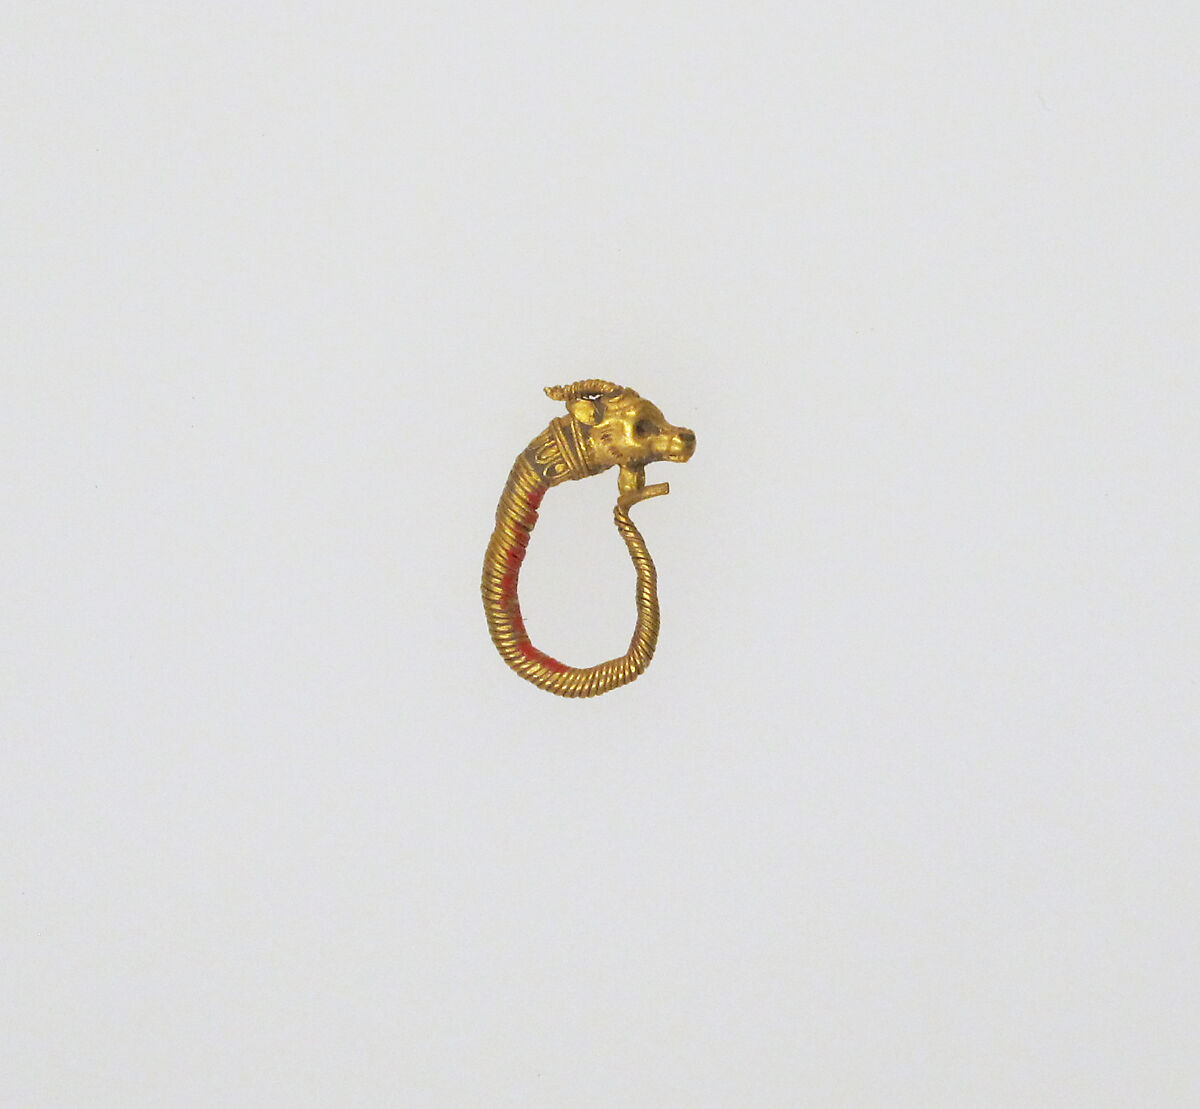 Earring with head of a goat, Gold 